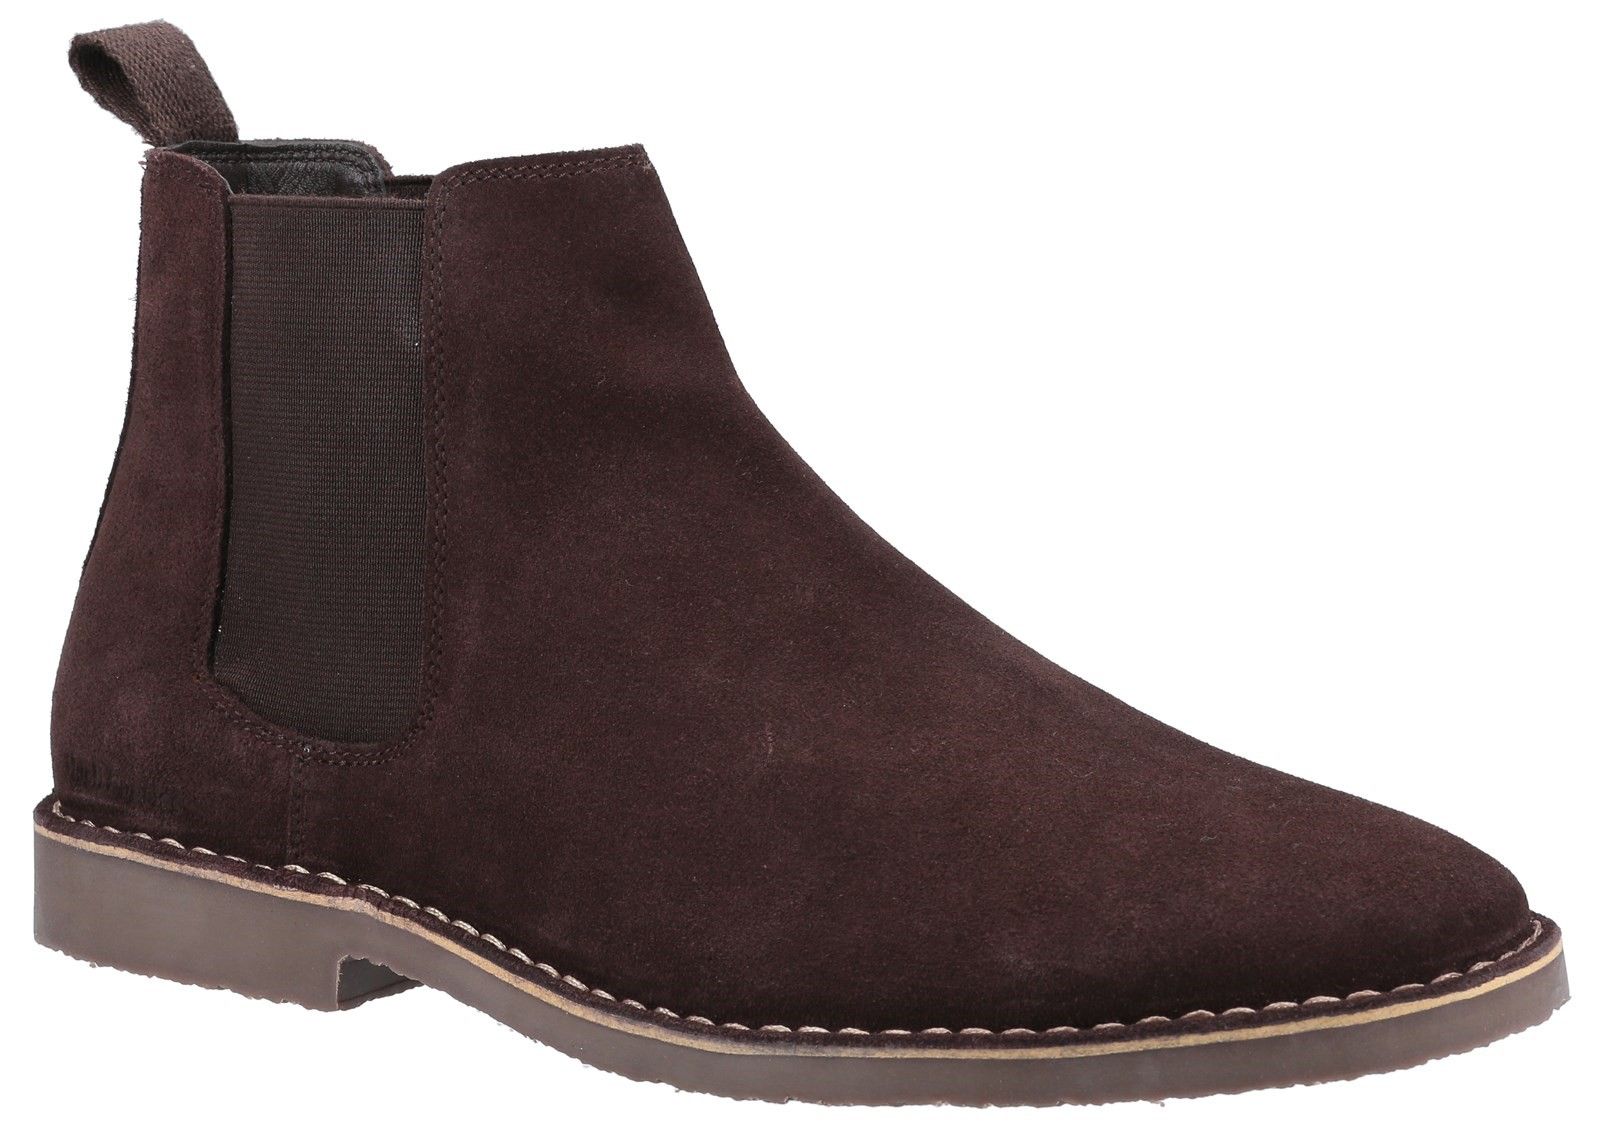 Men's Chelsea boot; Eddie is crafted with real suede leather and has a comfortable cushioned memory foam leather footbed. The flexible sole unit makes this the perfect smart all day footwear.Real suede upper. 
Pull on boot with double elastic gore and back tab. 
Leather and textile lining. 
Memory foam leather sock. 
Flexible and lightweight gum unit.